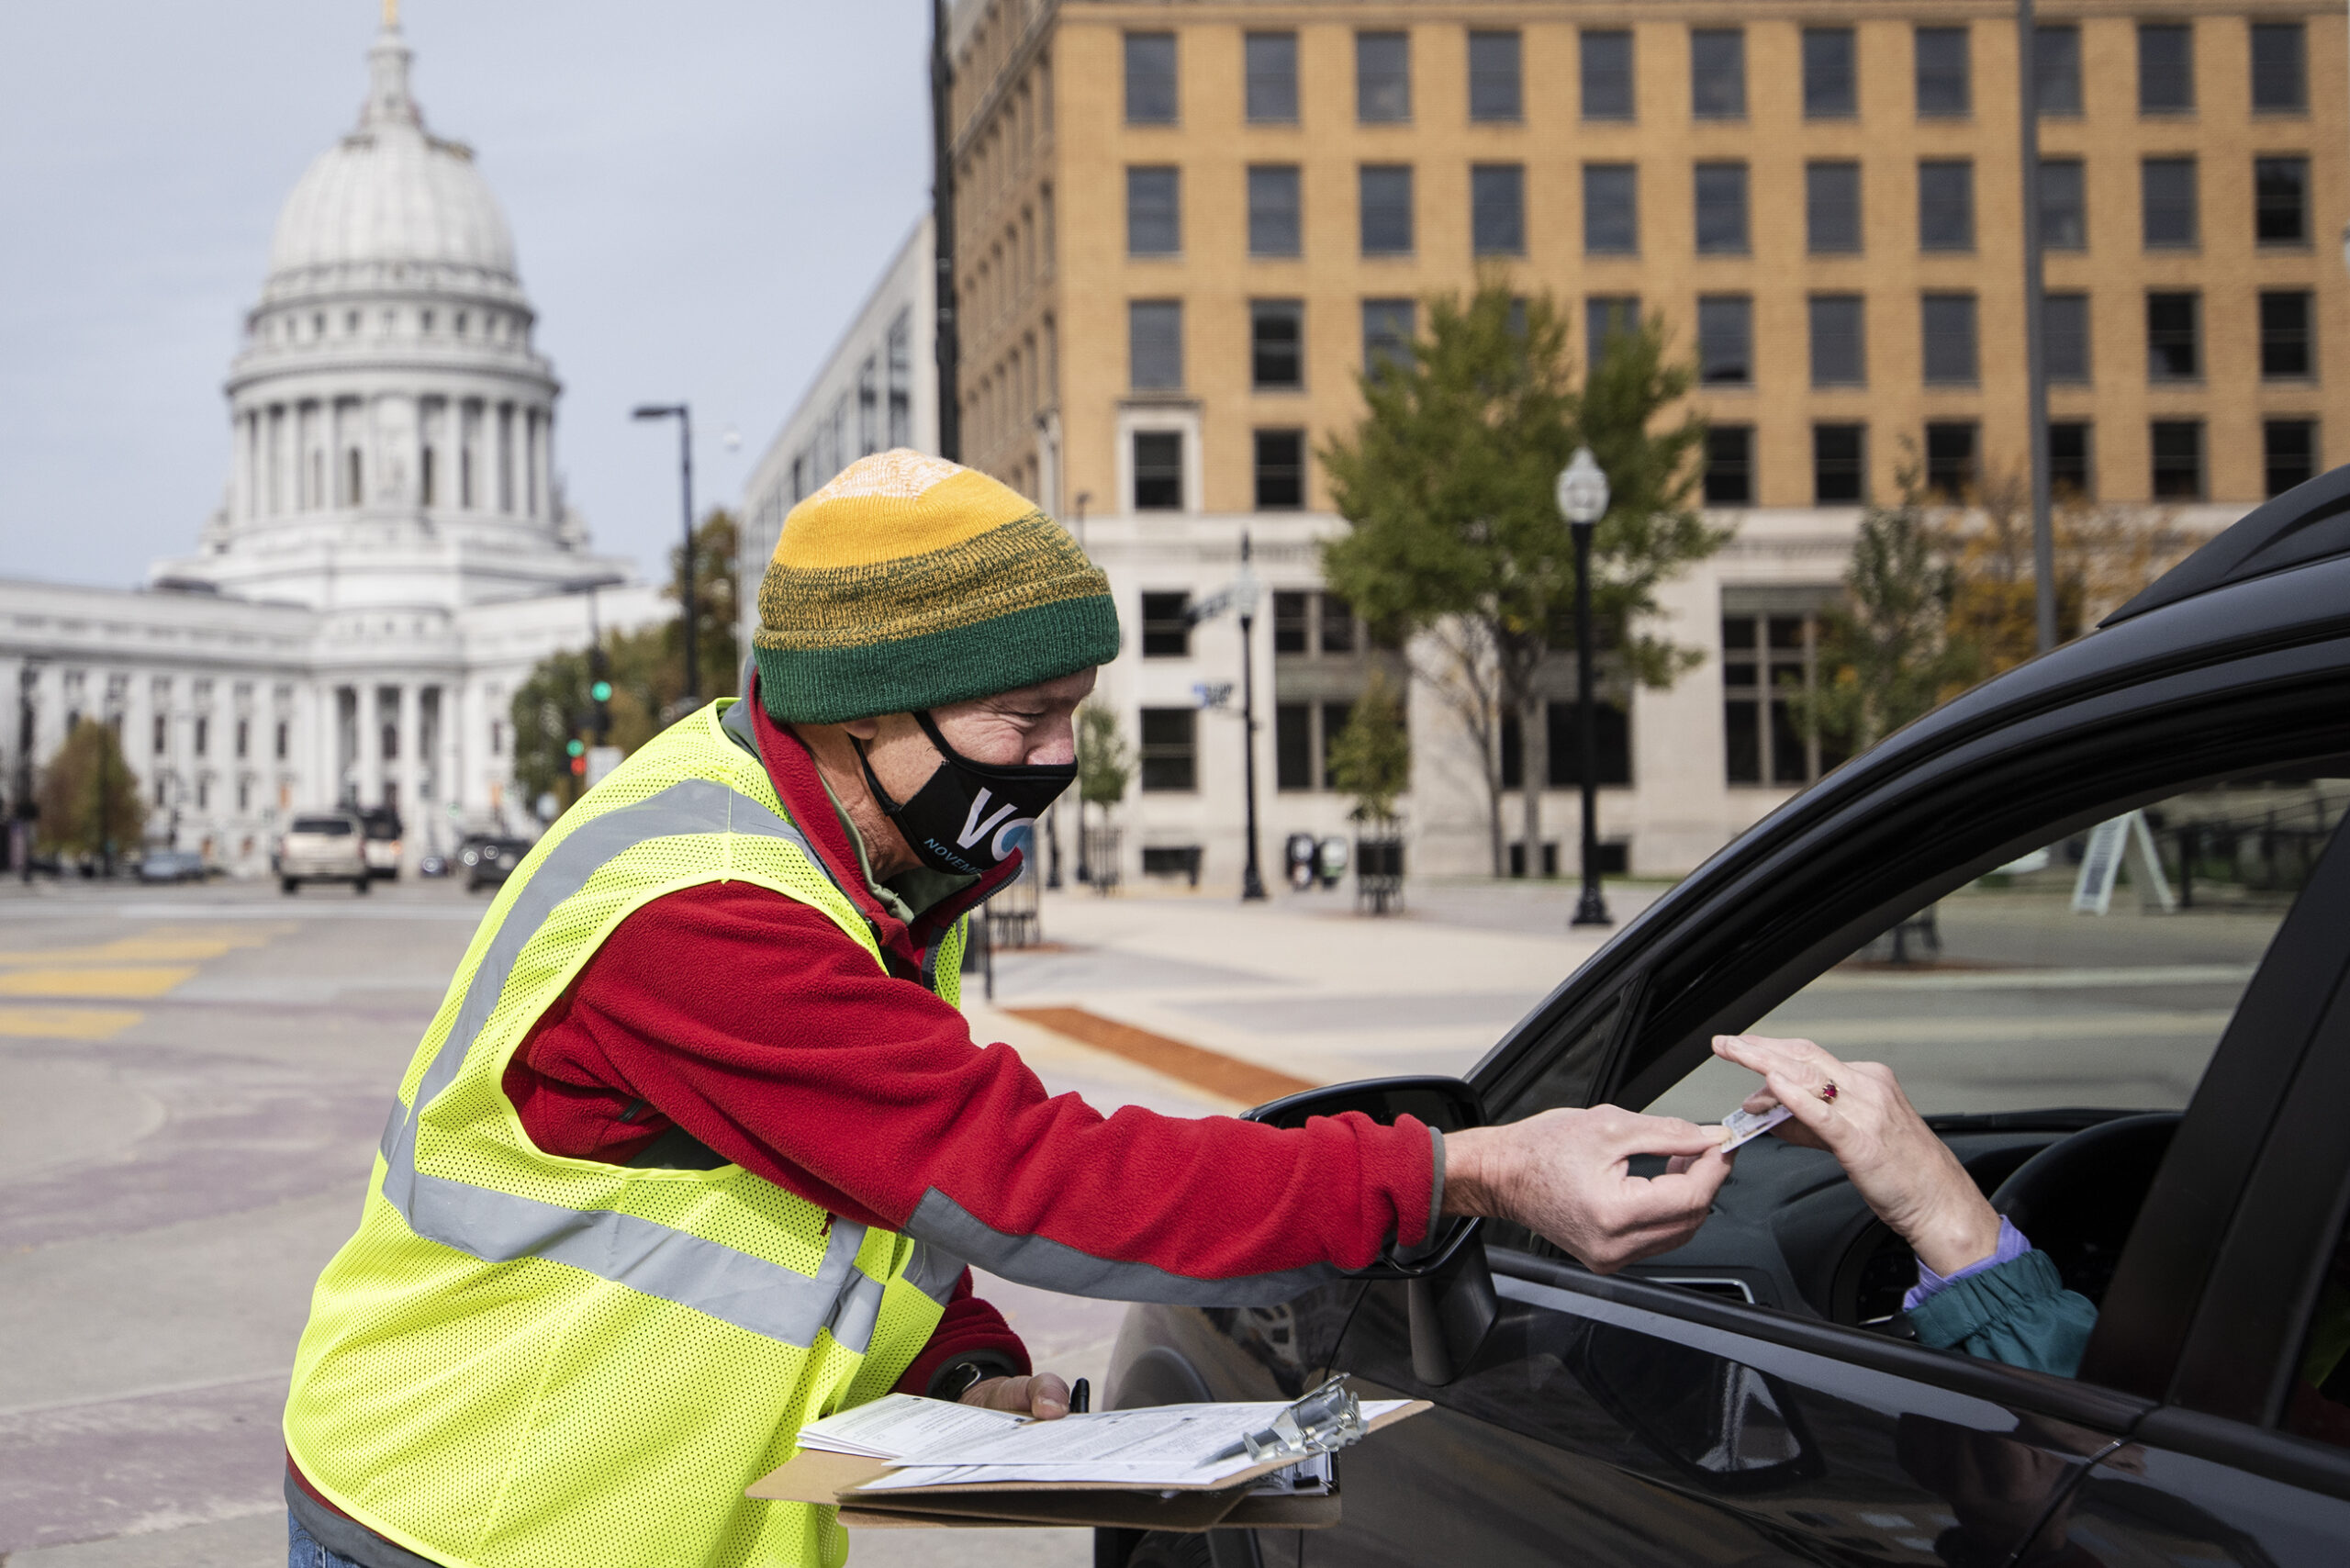 The Wisconsin State Capitol can be seen behind a poll worker in a mask and neon vest. He takes an ID card from a voter's hand as they sit in their car.